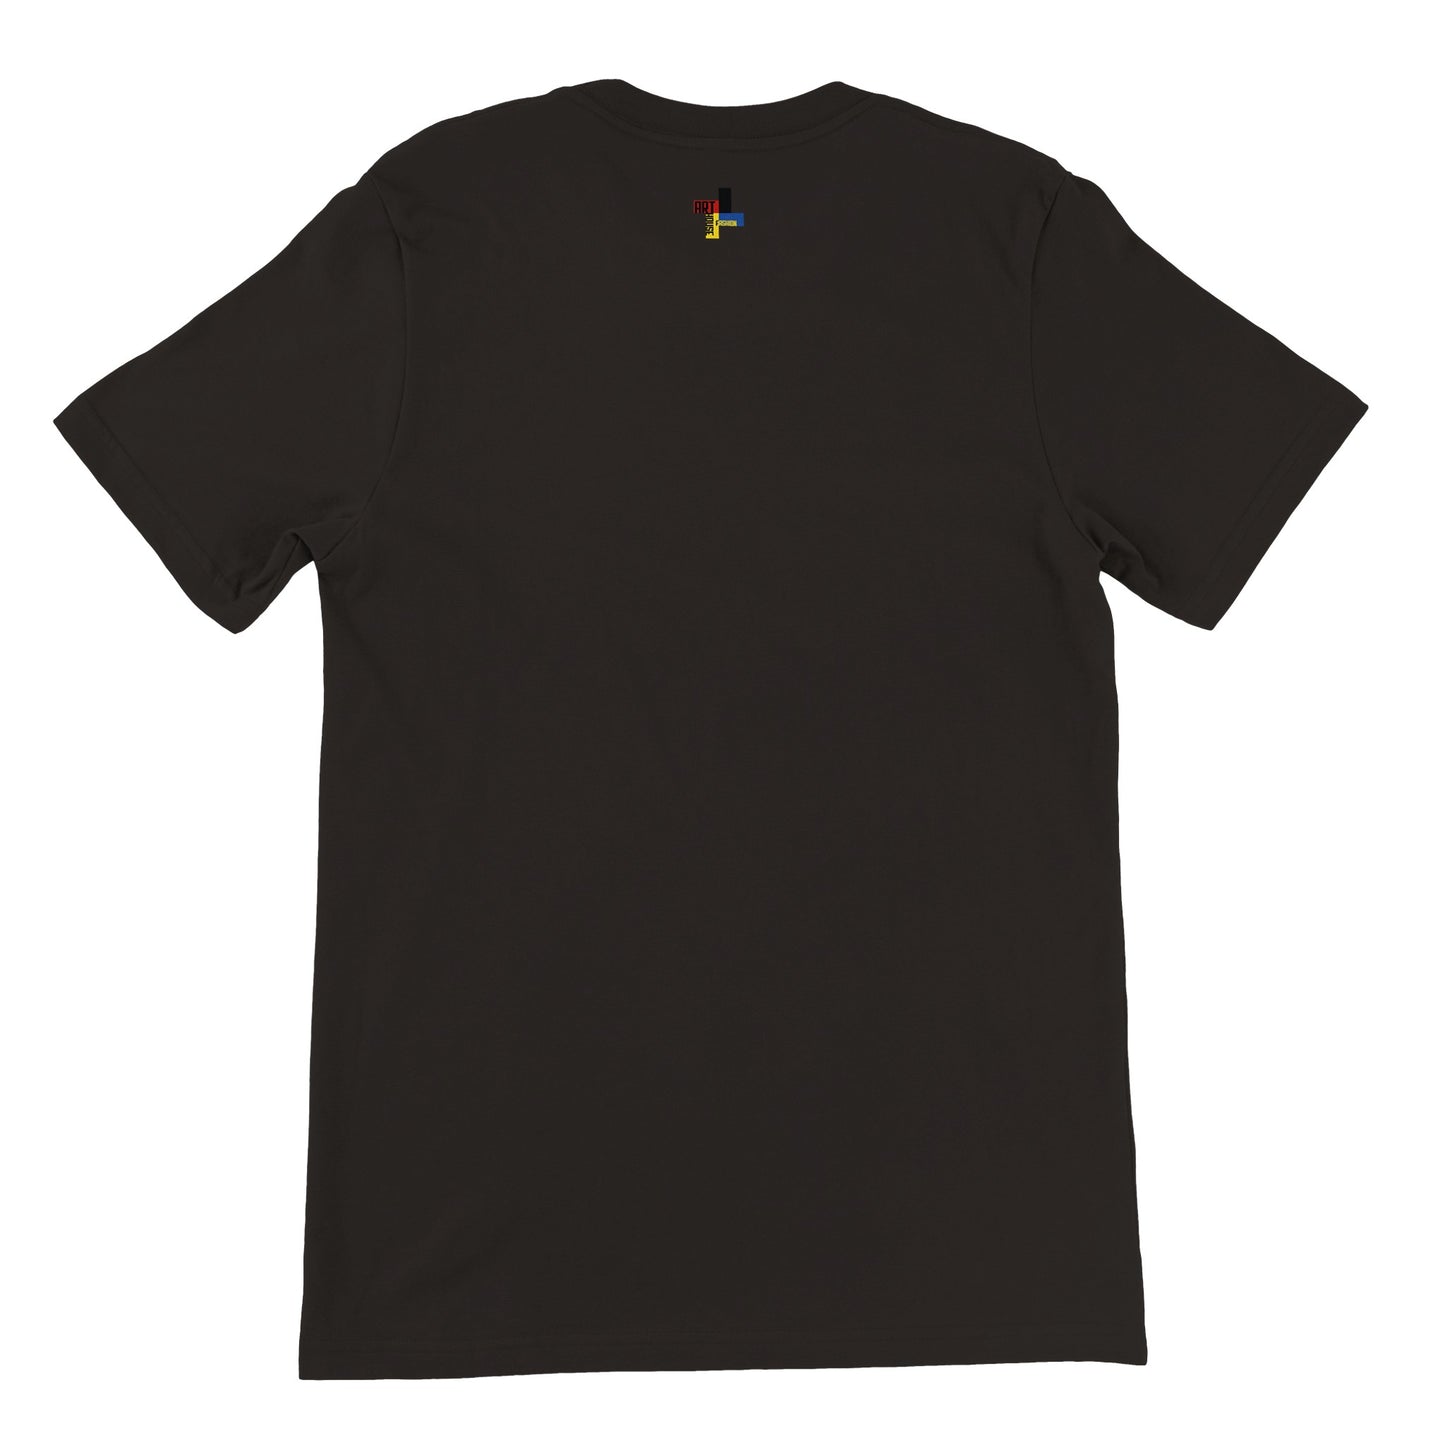 a black t - shirt with a logo on the chest